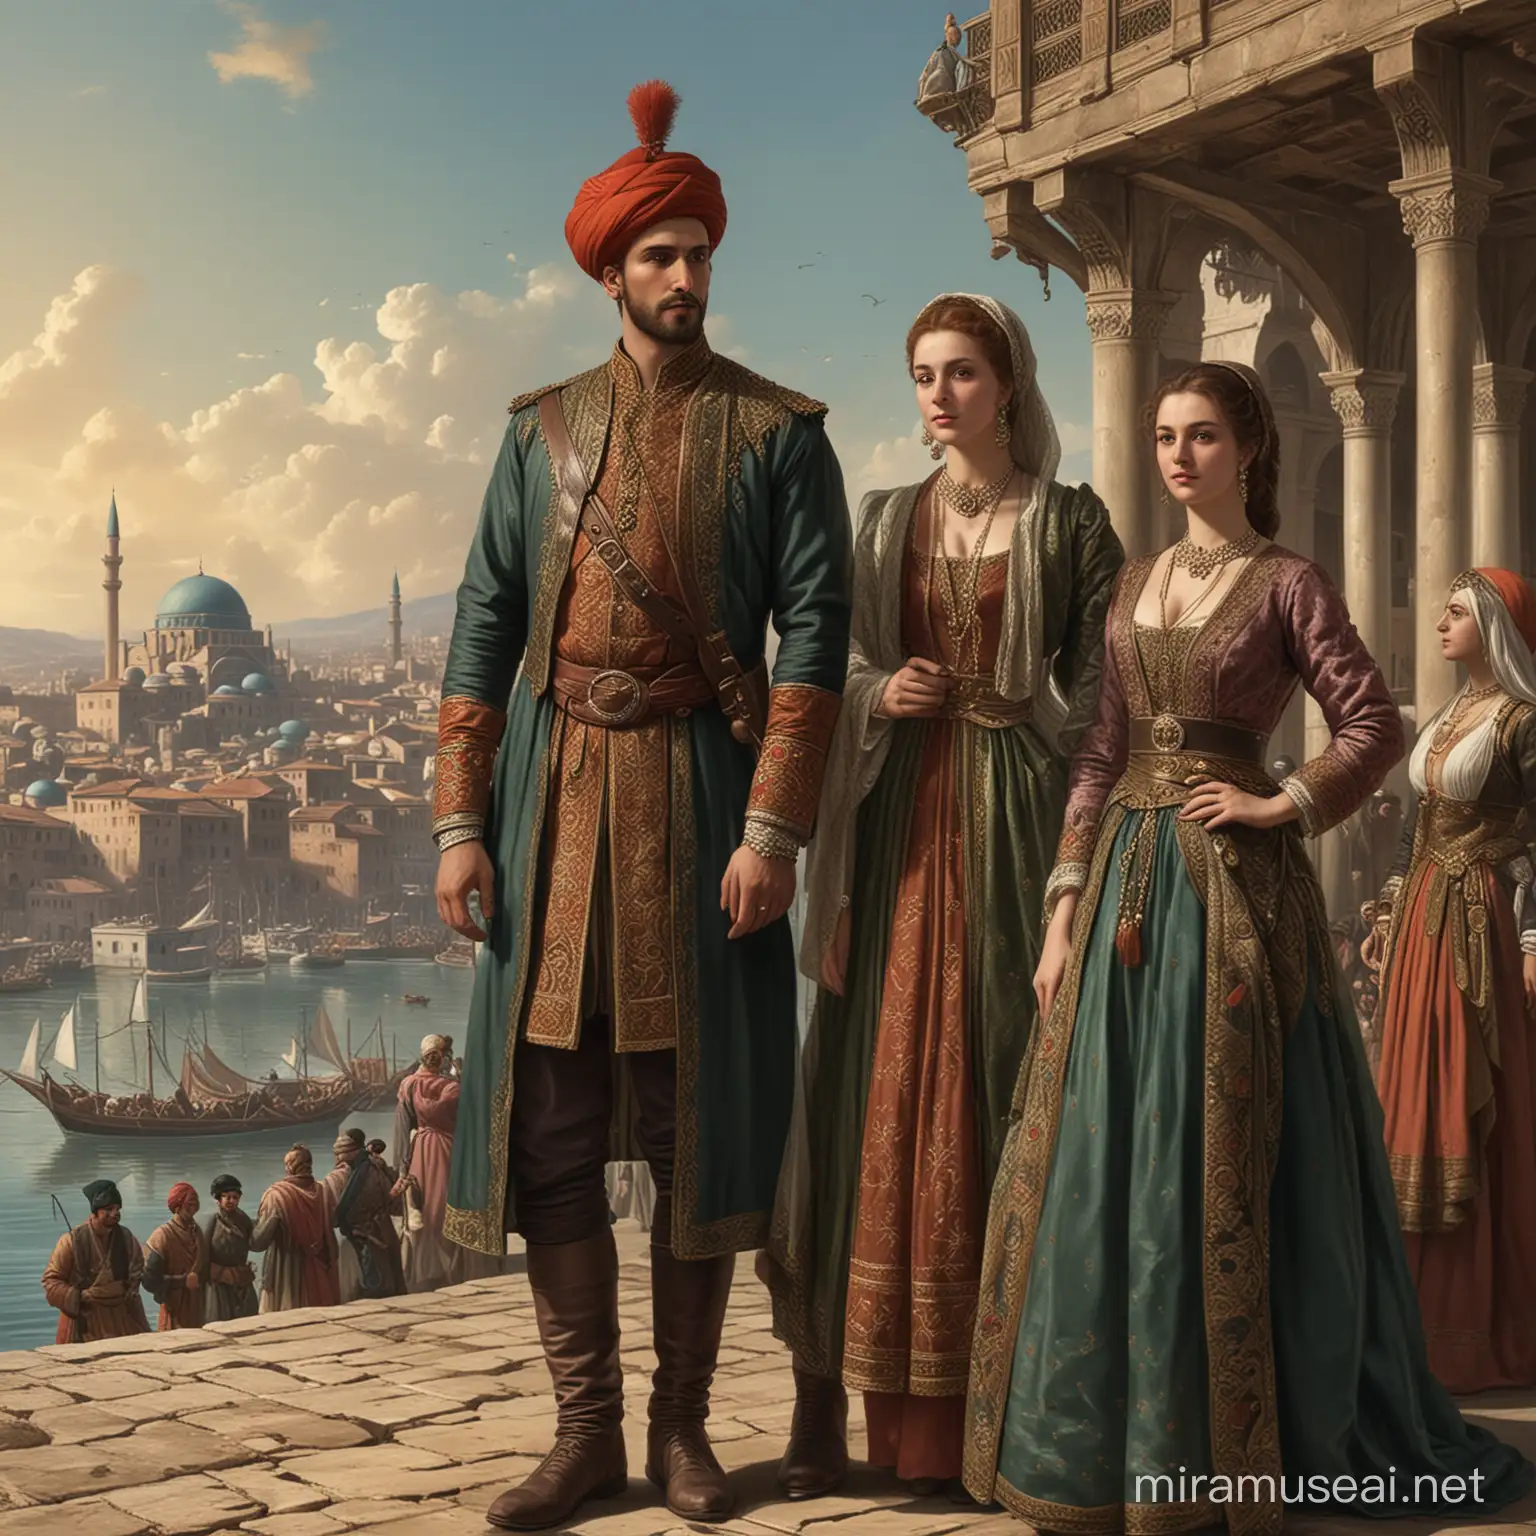  17th century aesthetic,concept art,high quality image,1600s,city,fashion,male and female,ottoman empier

